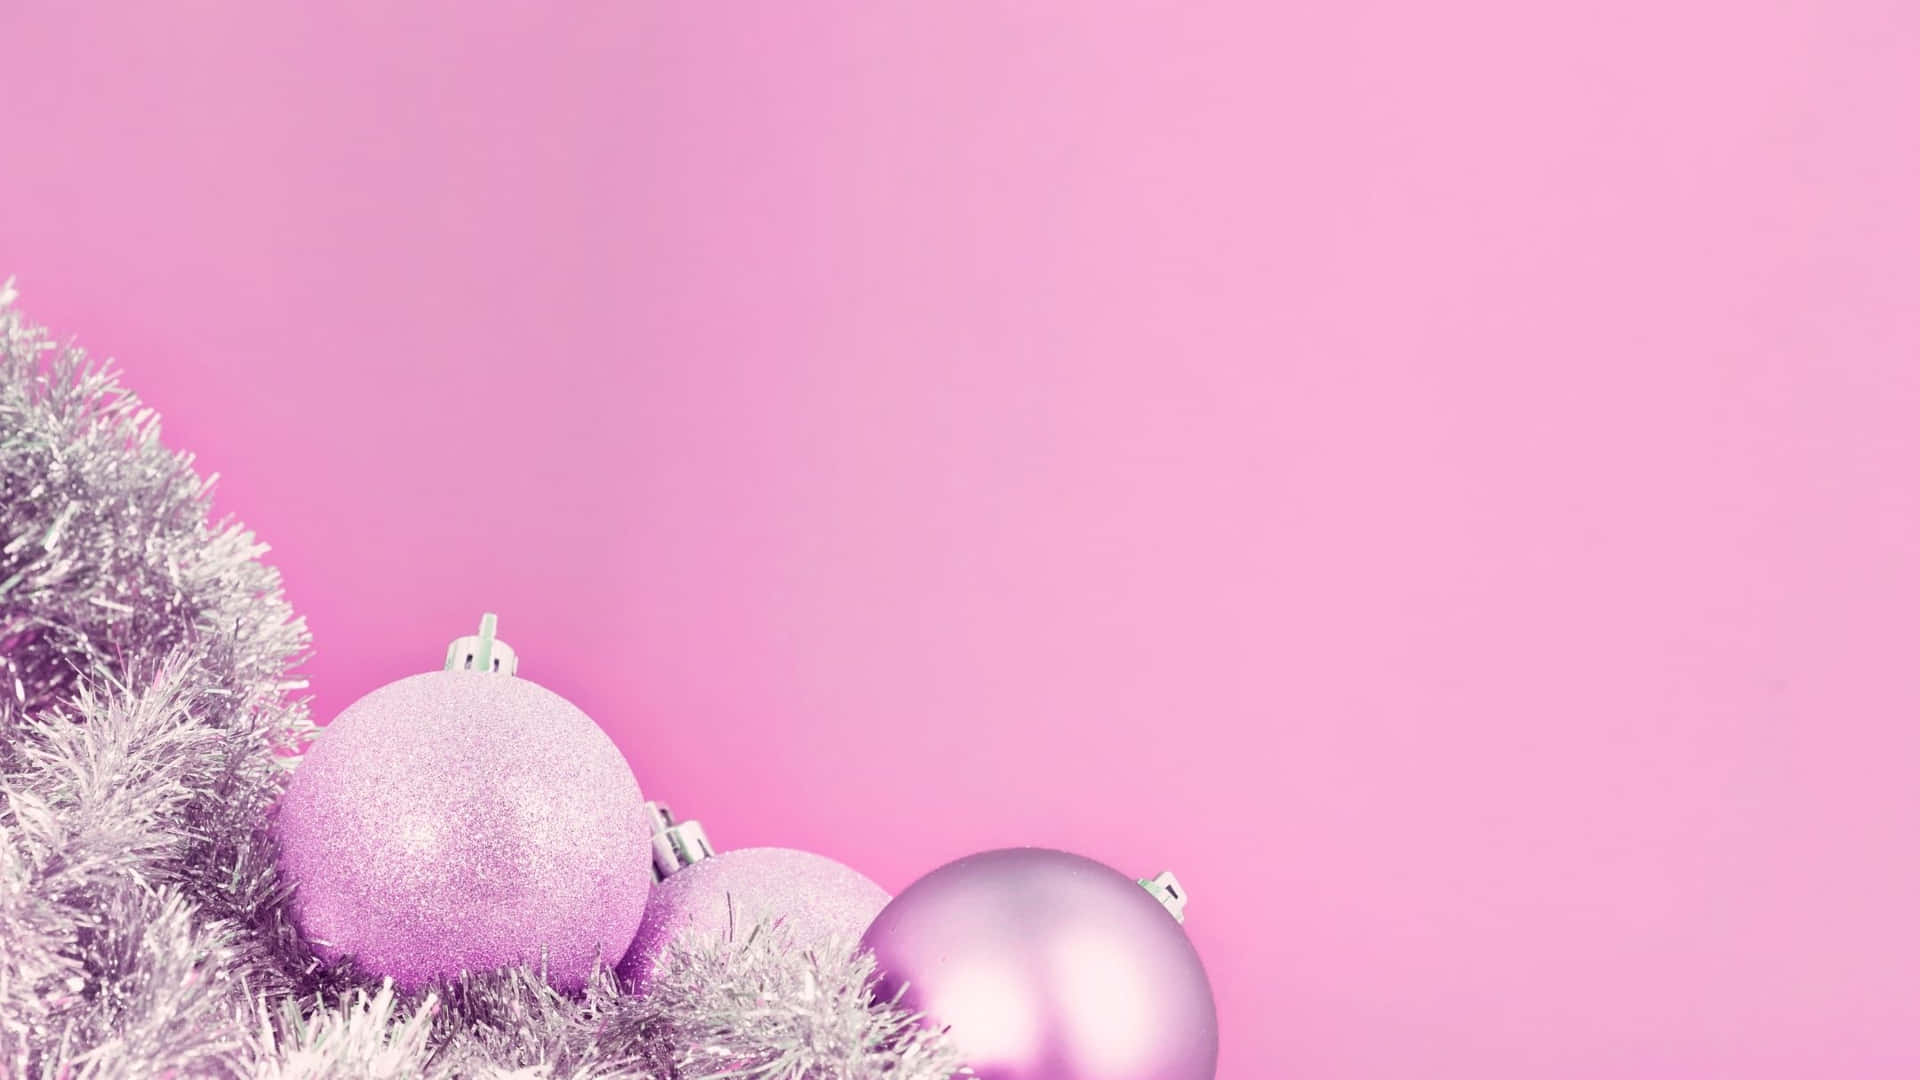 A Pink Christmas Tree With Silver Ornaments On It